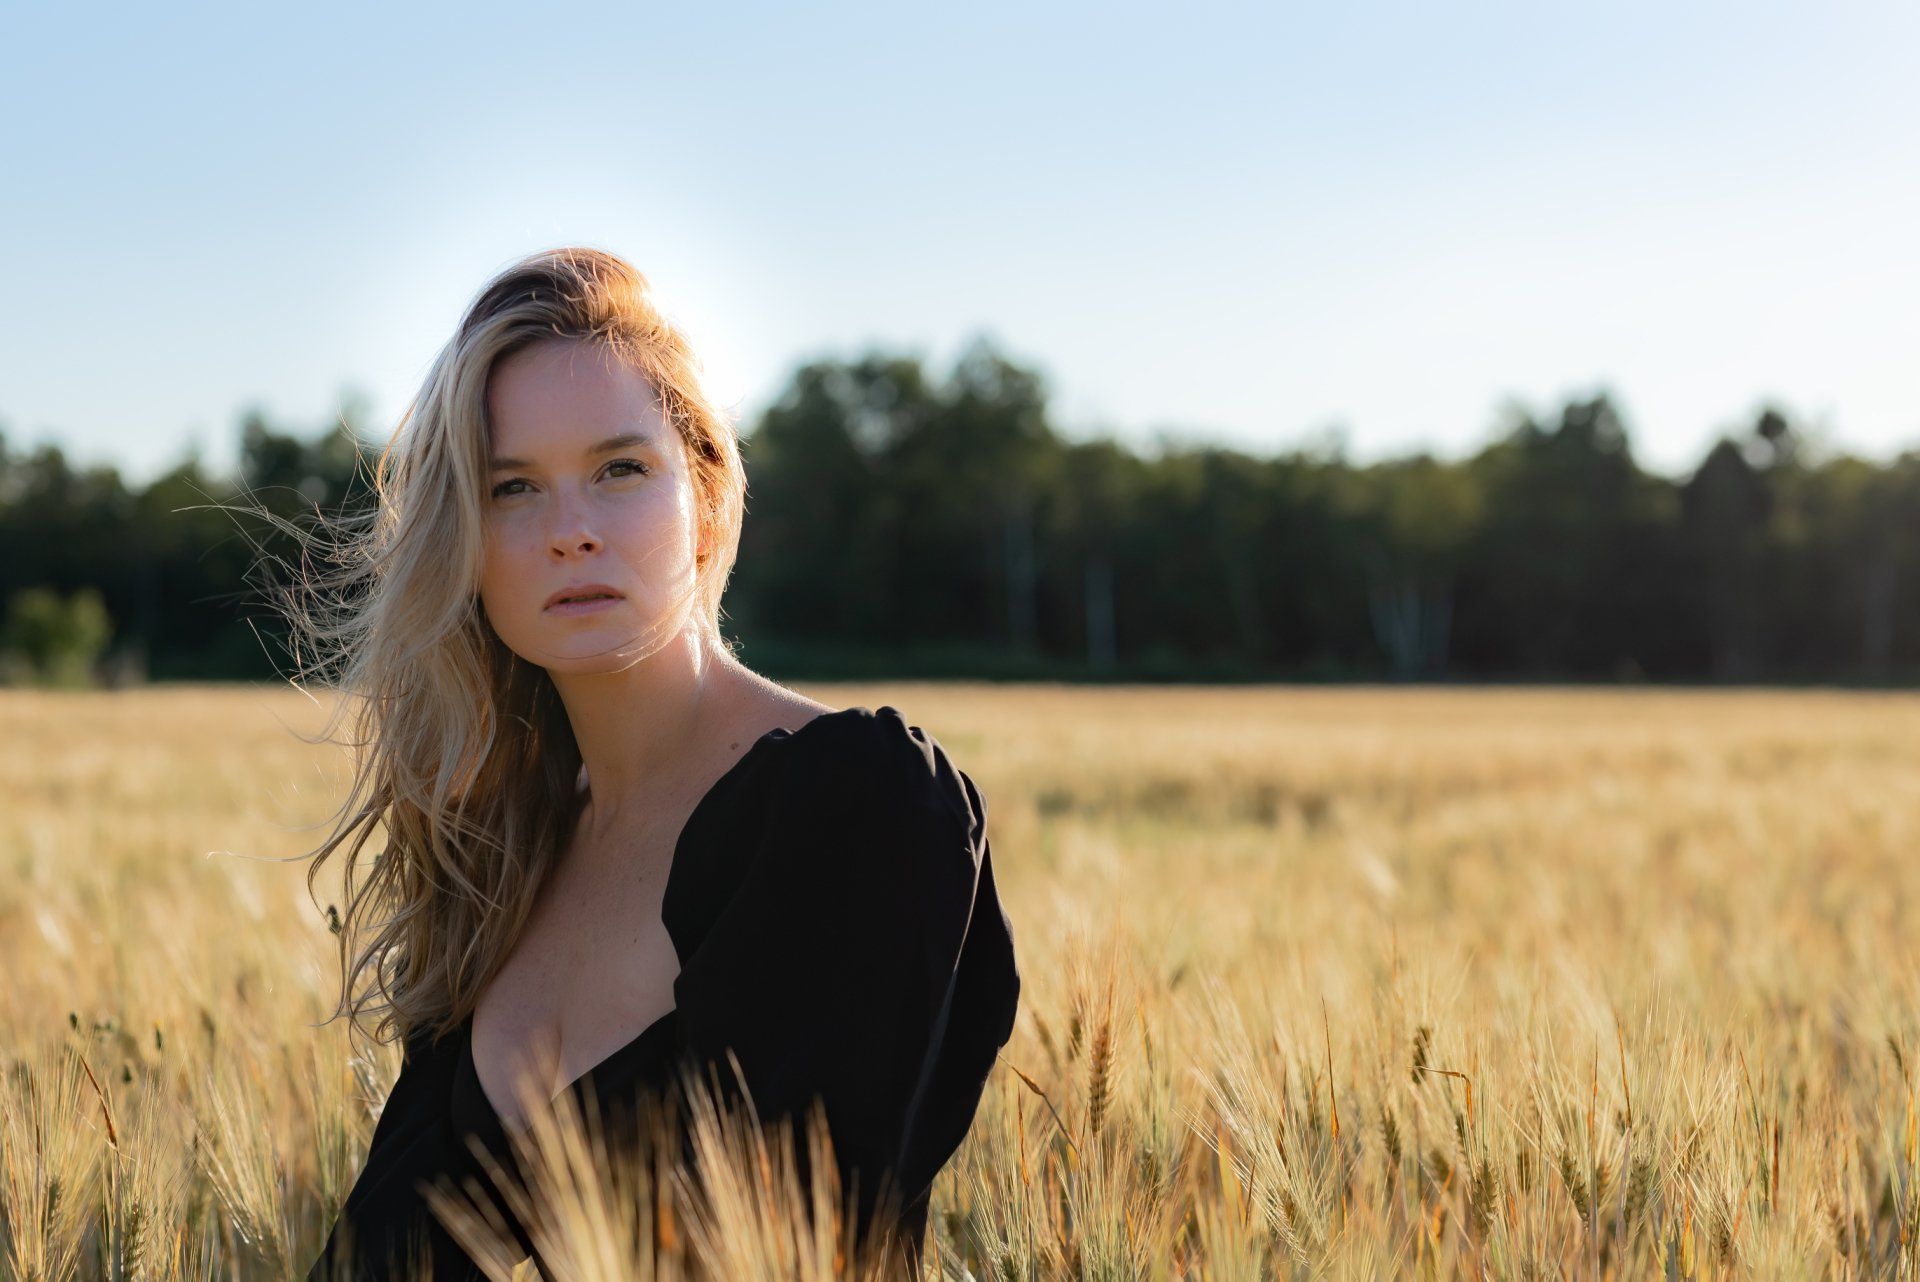 Personal branding photo of a woman with long blond hair wearing a black top standing in a field of golden wheat